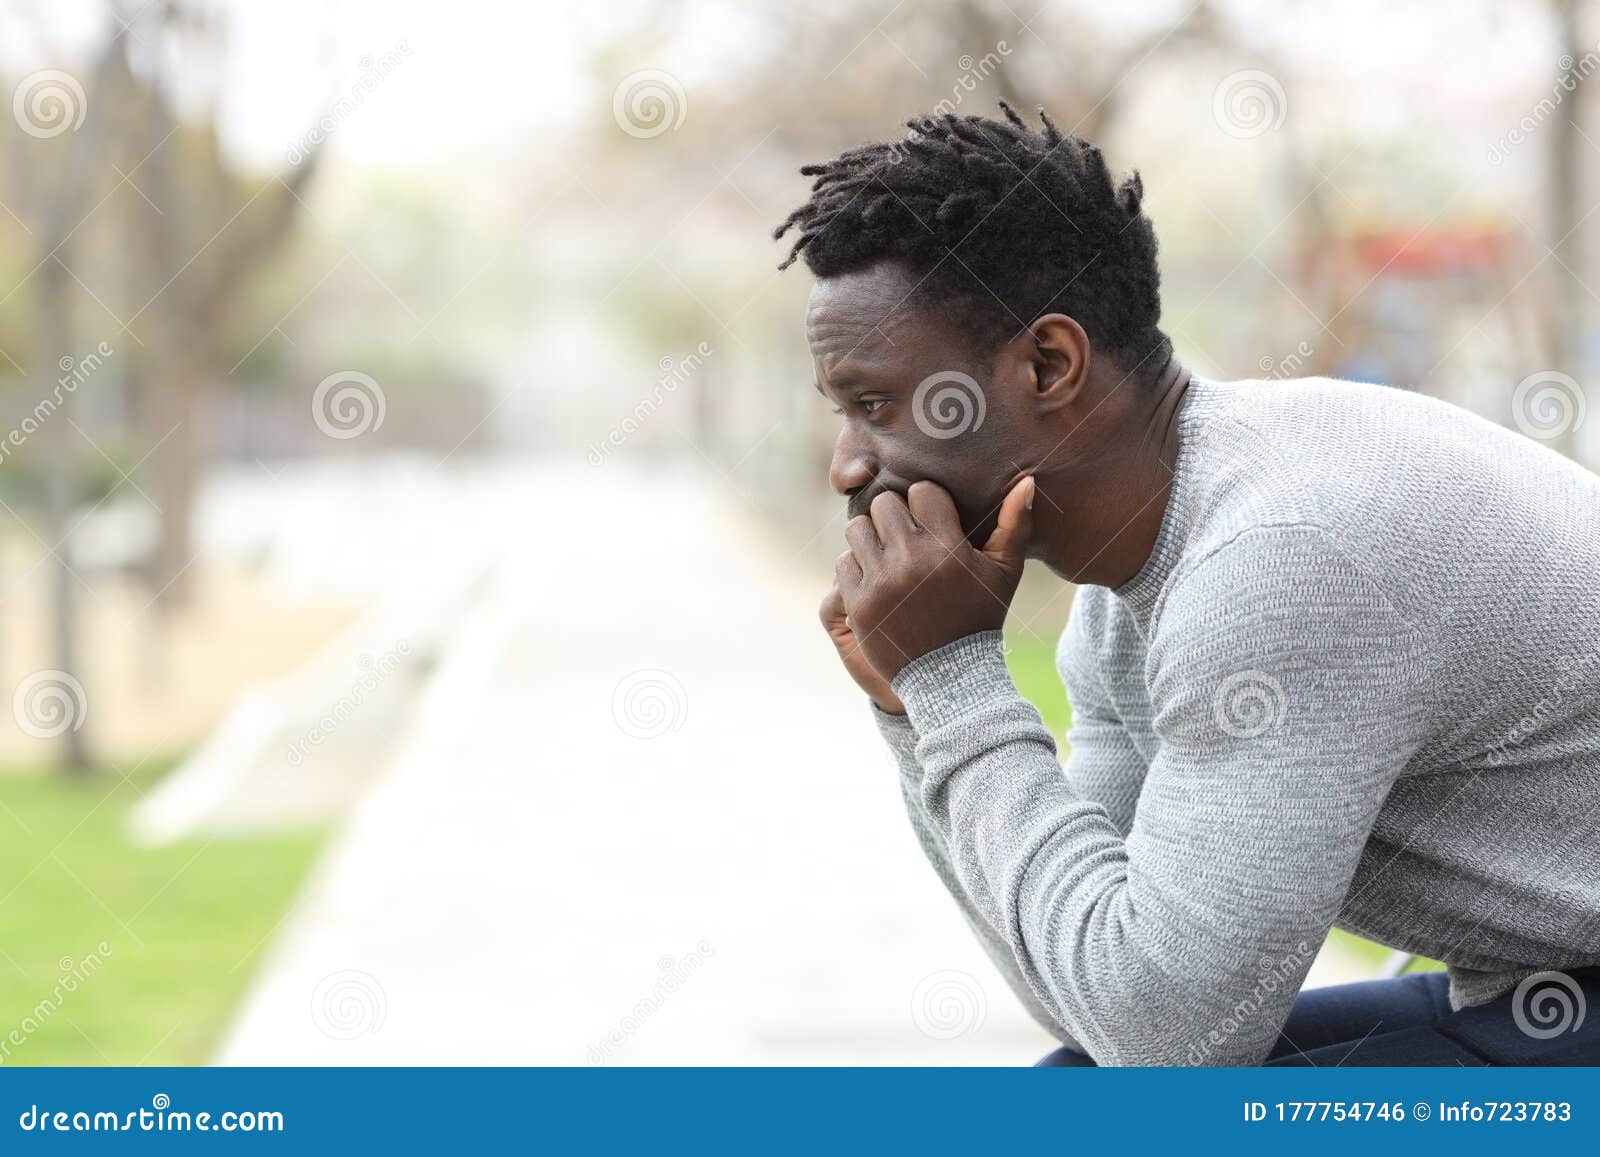 pensive serious black man looking away on a park